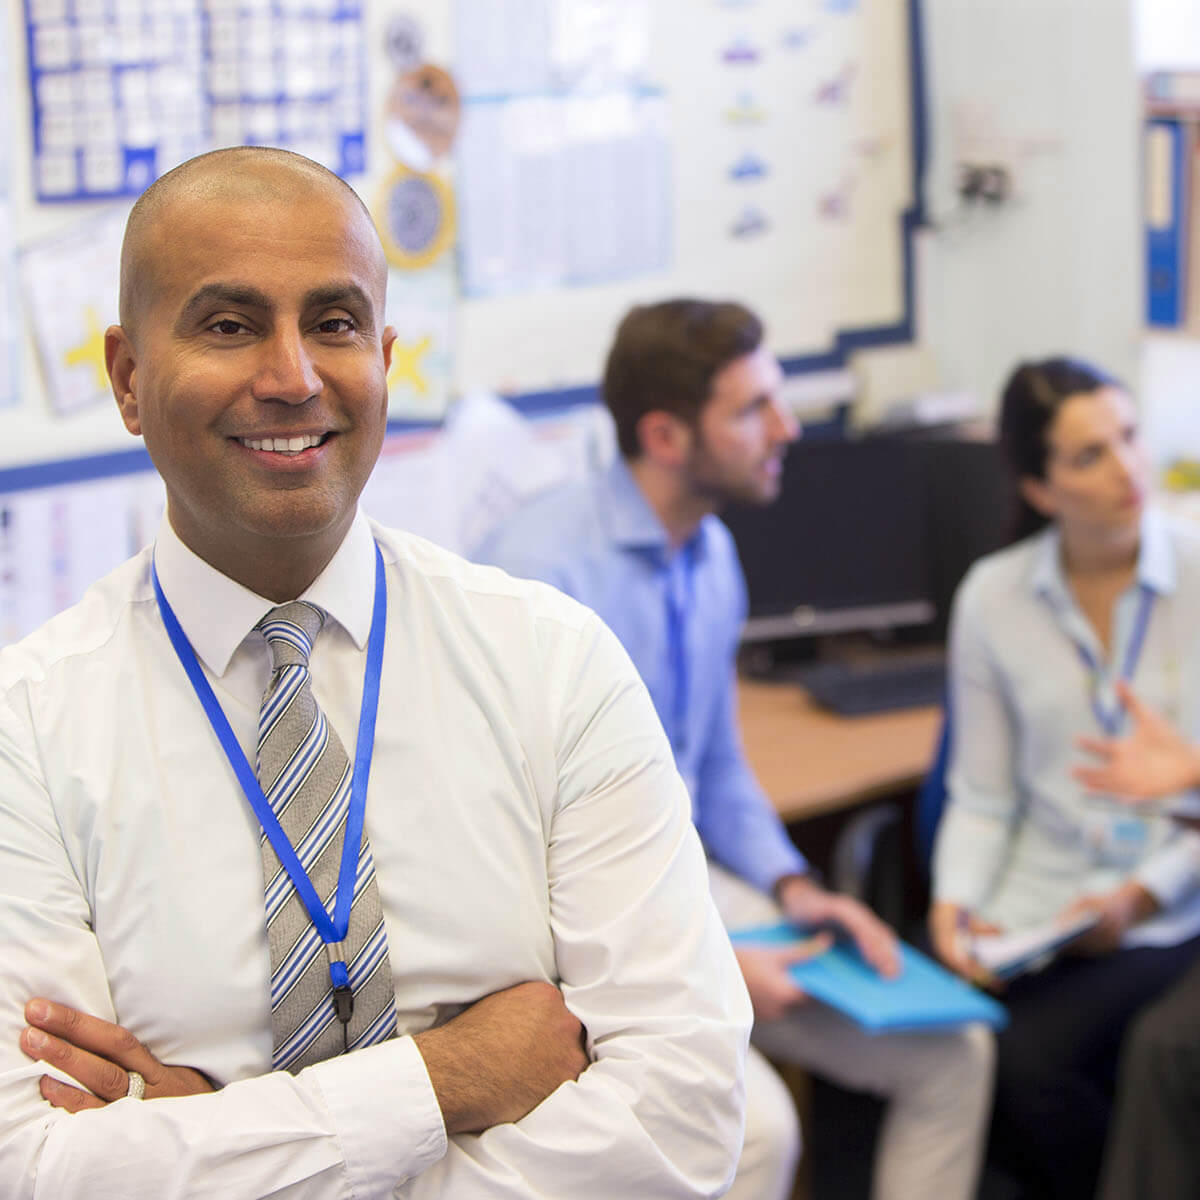 teacher smiling whilst a meeting is being conducted behind him